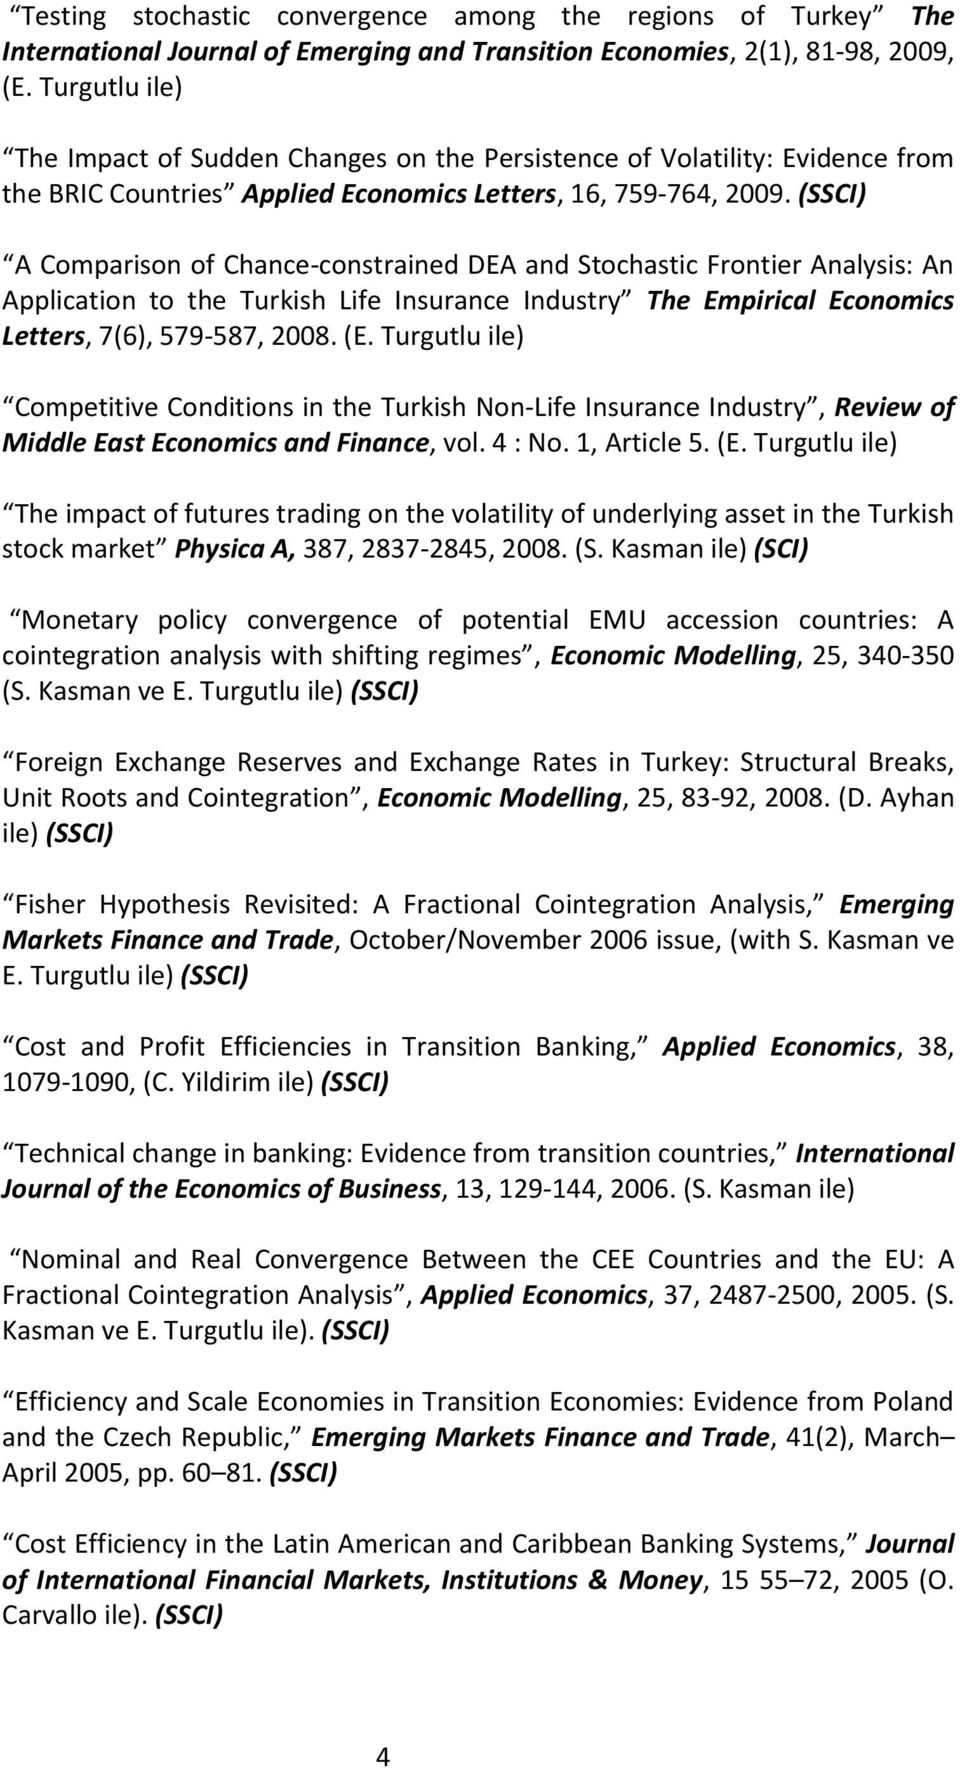 (SSCI) A Comparison of Chance-constrained DEA and Stochastic Frontier Analysis: An Application to the Turkish Life Insurance Industry The Empirical Economics Letters, 7(6), 579-587, 2008. (E.